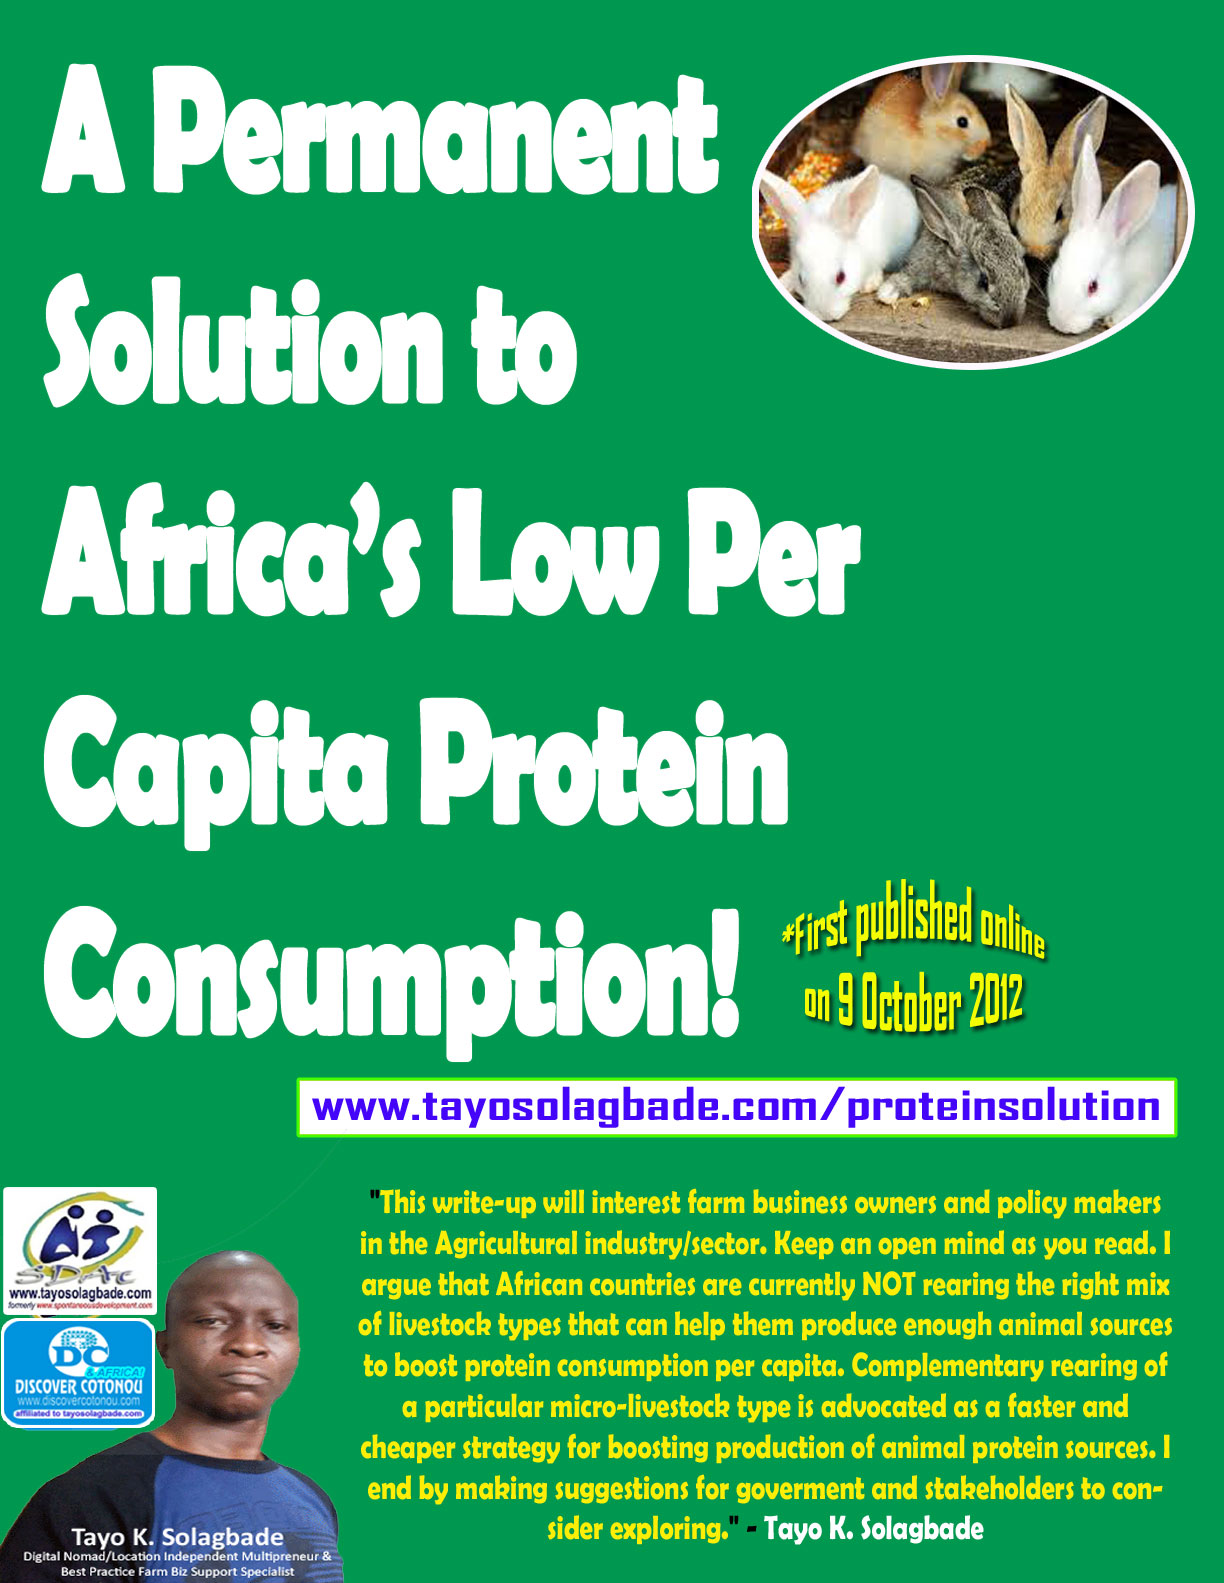 PDF White Paper | A Permanent Solution to Africa’s Low Per Capita Protein Consumption! - Email your WhatsApp number to Tayo@tksola.com with RABBIT FARM BIZ WHITE PAPER in the subject line - and I will send you download link